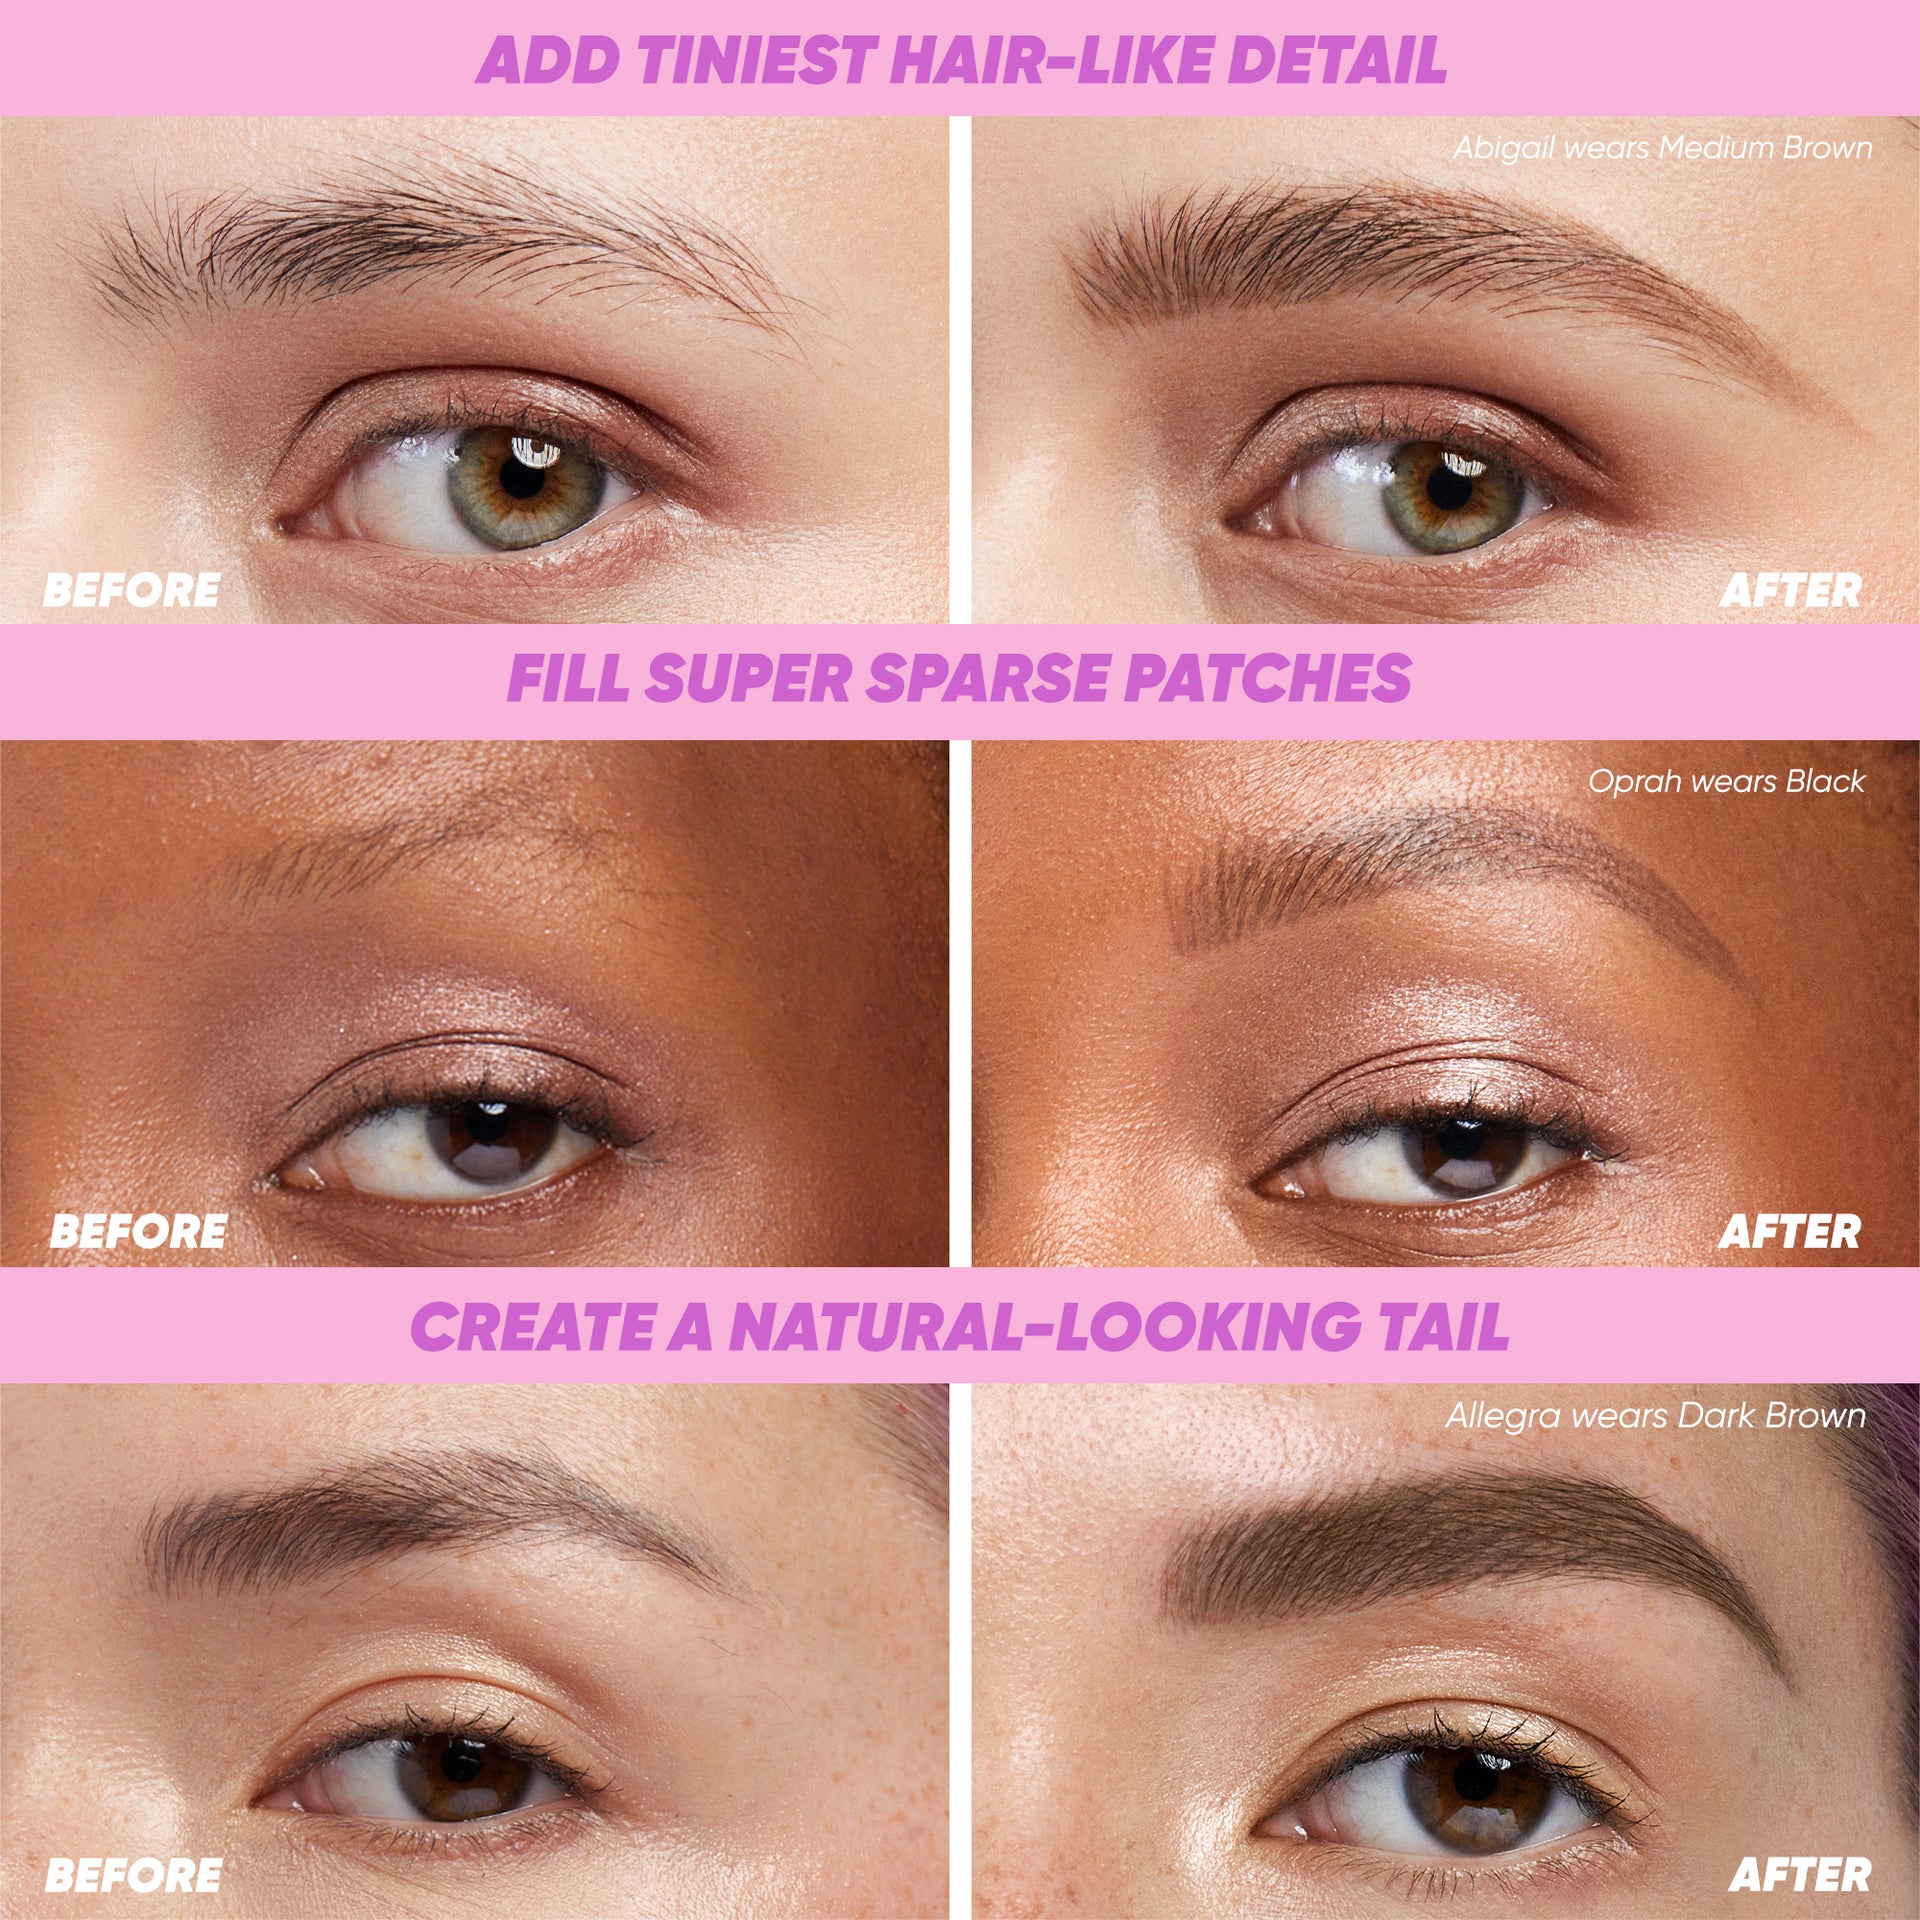 A before-and-after comparison of using various shades of Kosas Brow Pop Nano on different skin tones, showcasing the transformative yet natural effect on eyebrows.